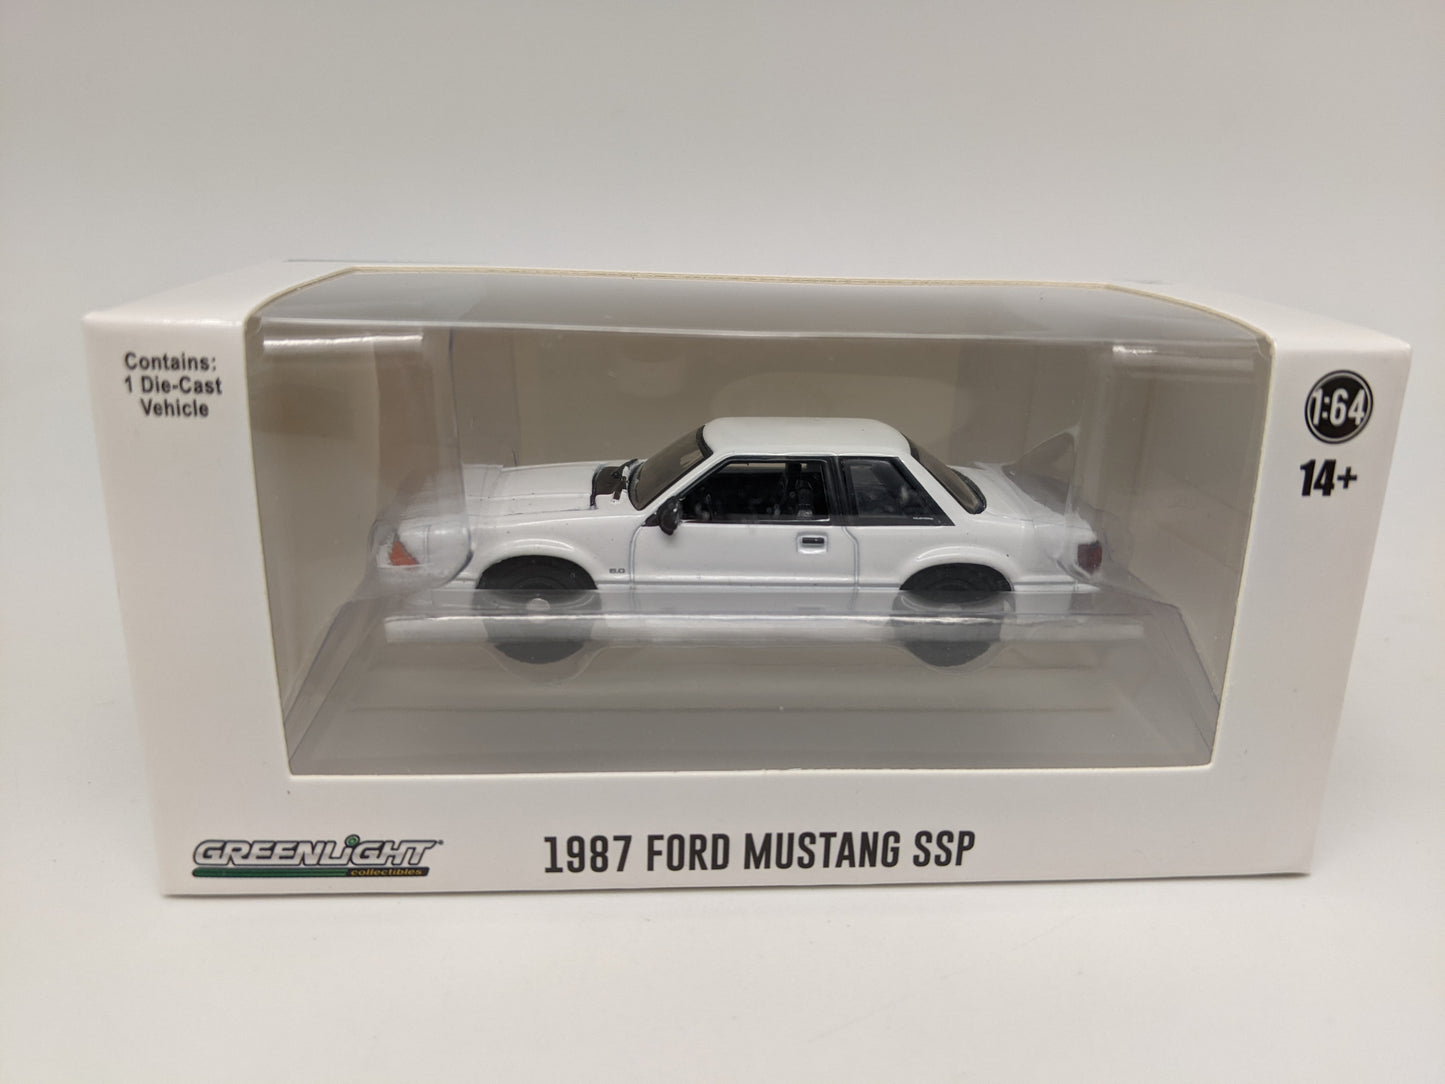 GL - 1987 Ford Mustang SSP with no lights